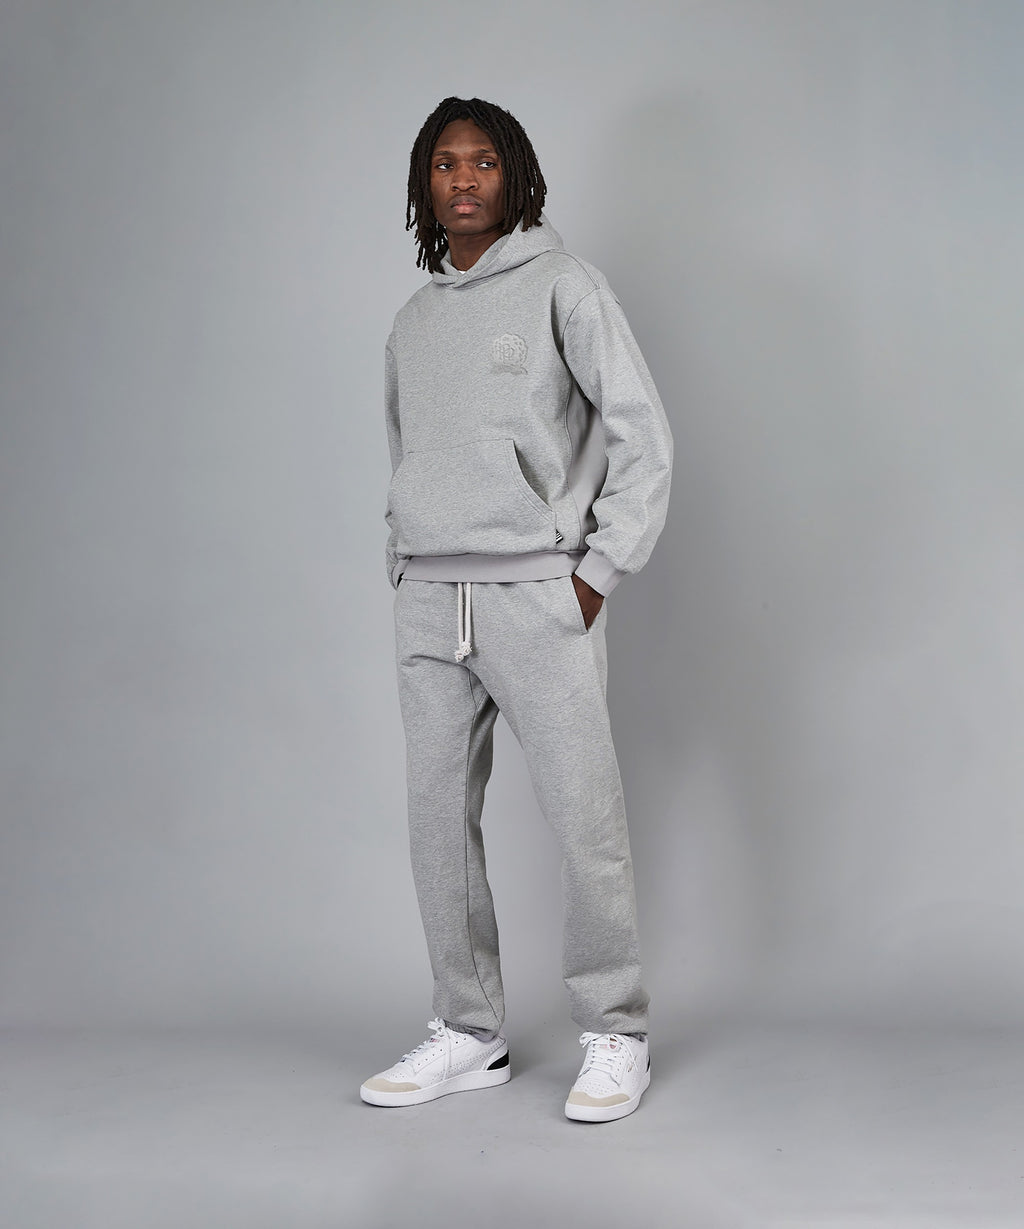  Model wearing Paper Planes Crest Hoodie and Sweatpant, color Heather Grey.